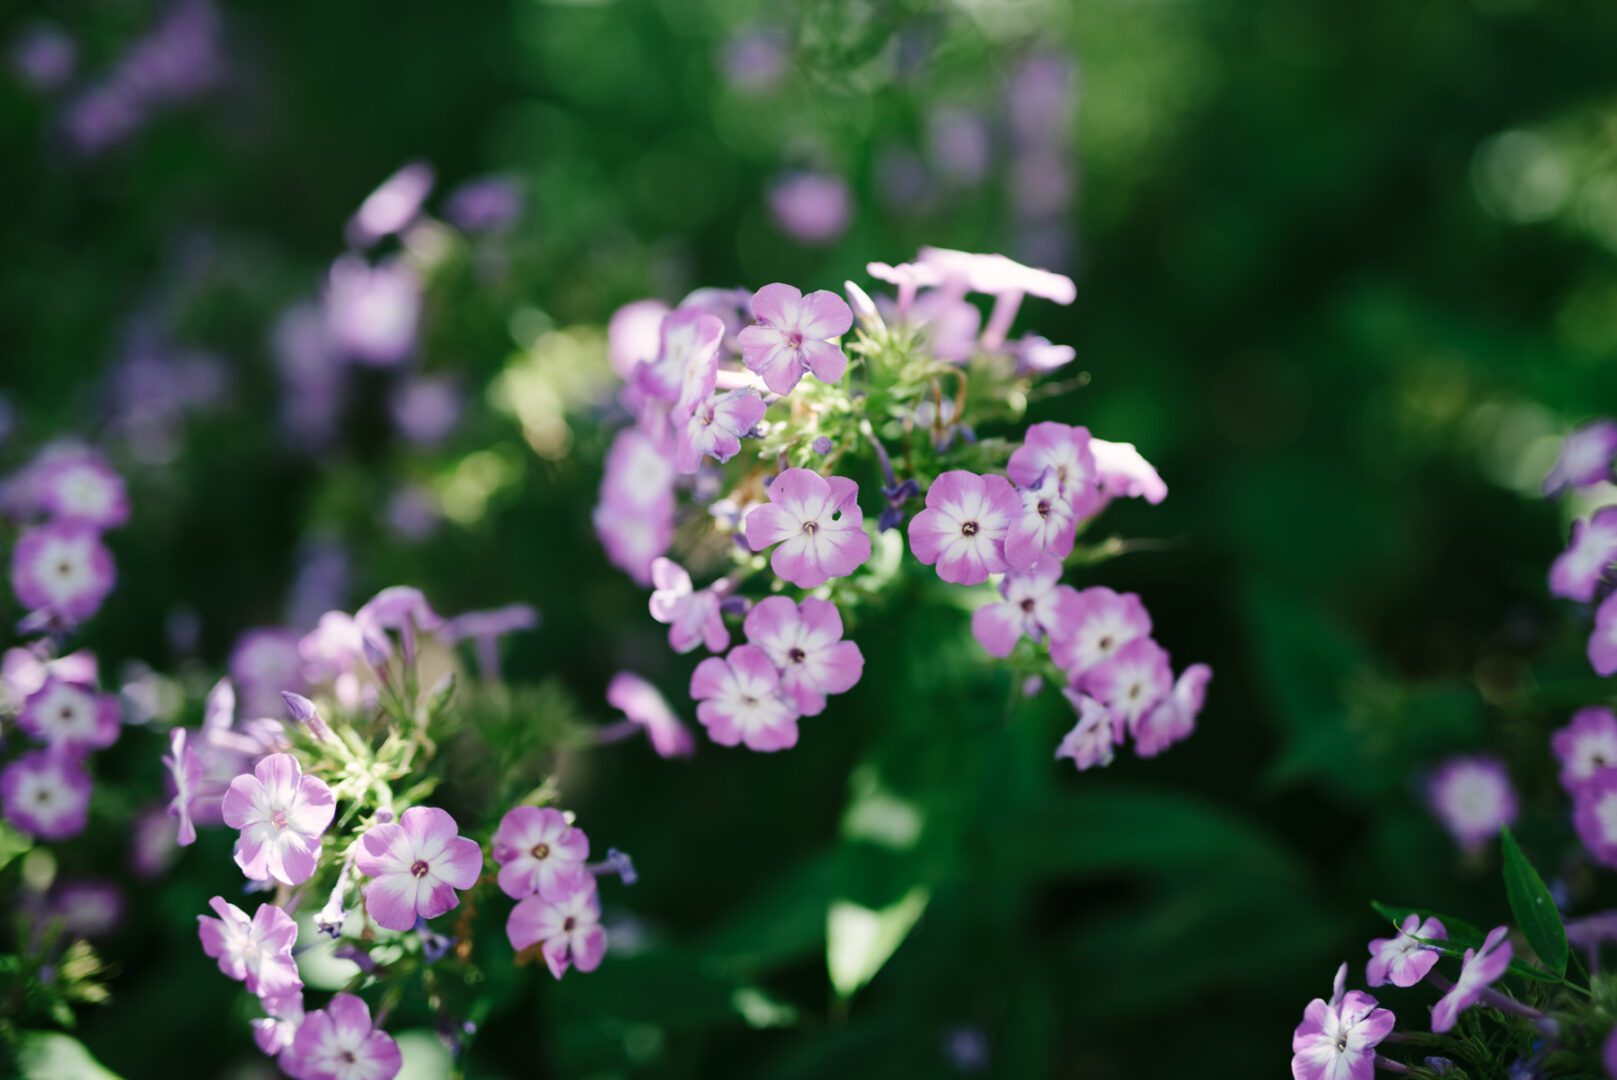 A close up of purple flowers in a garden.